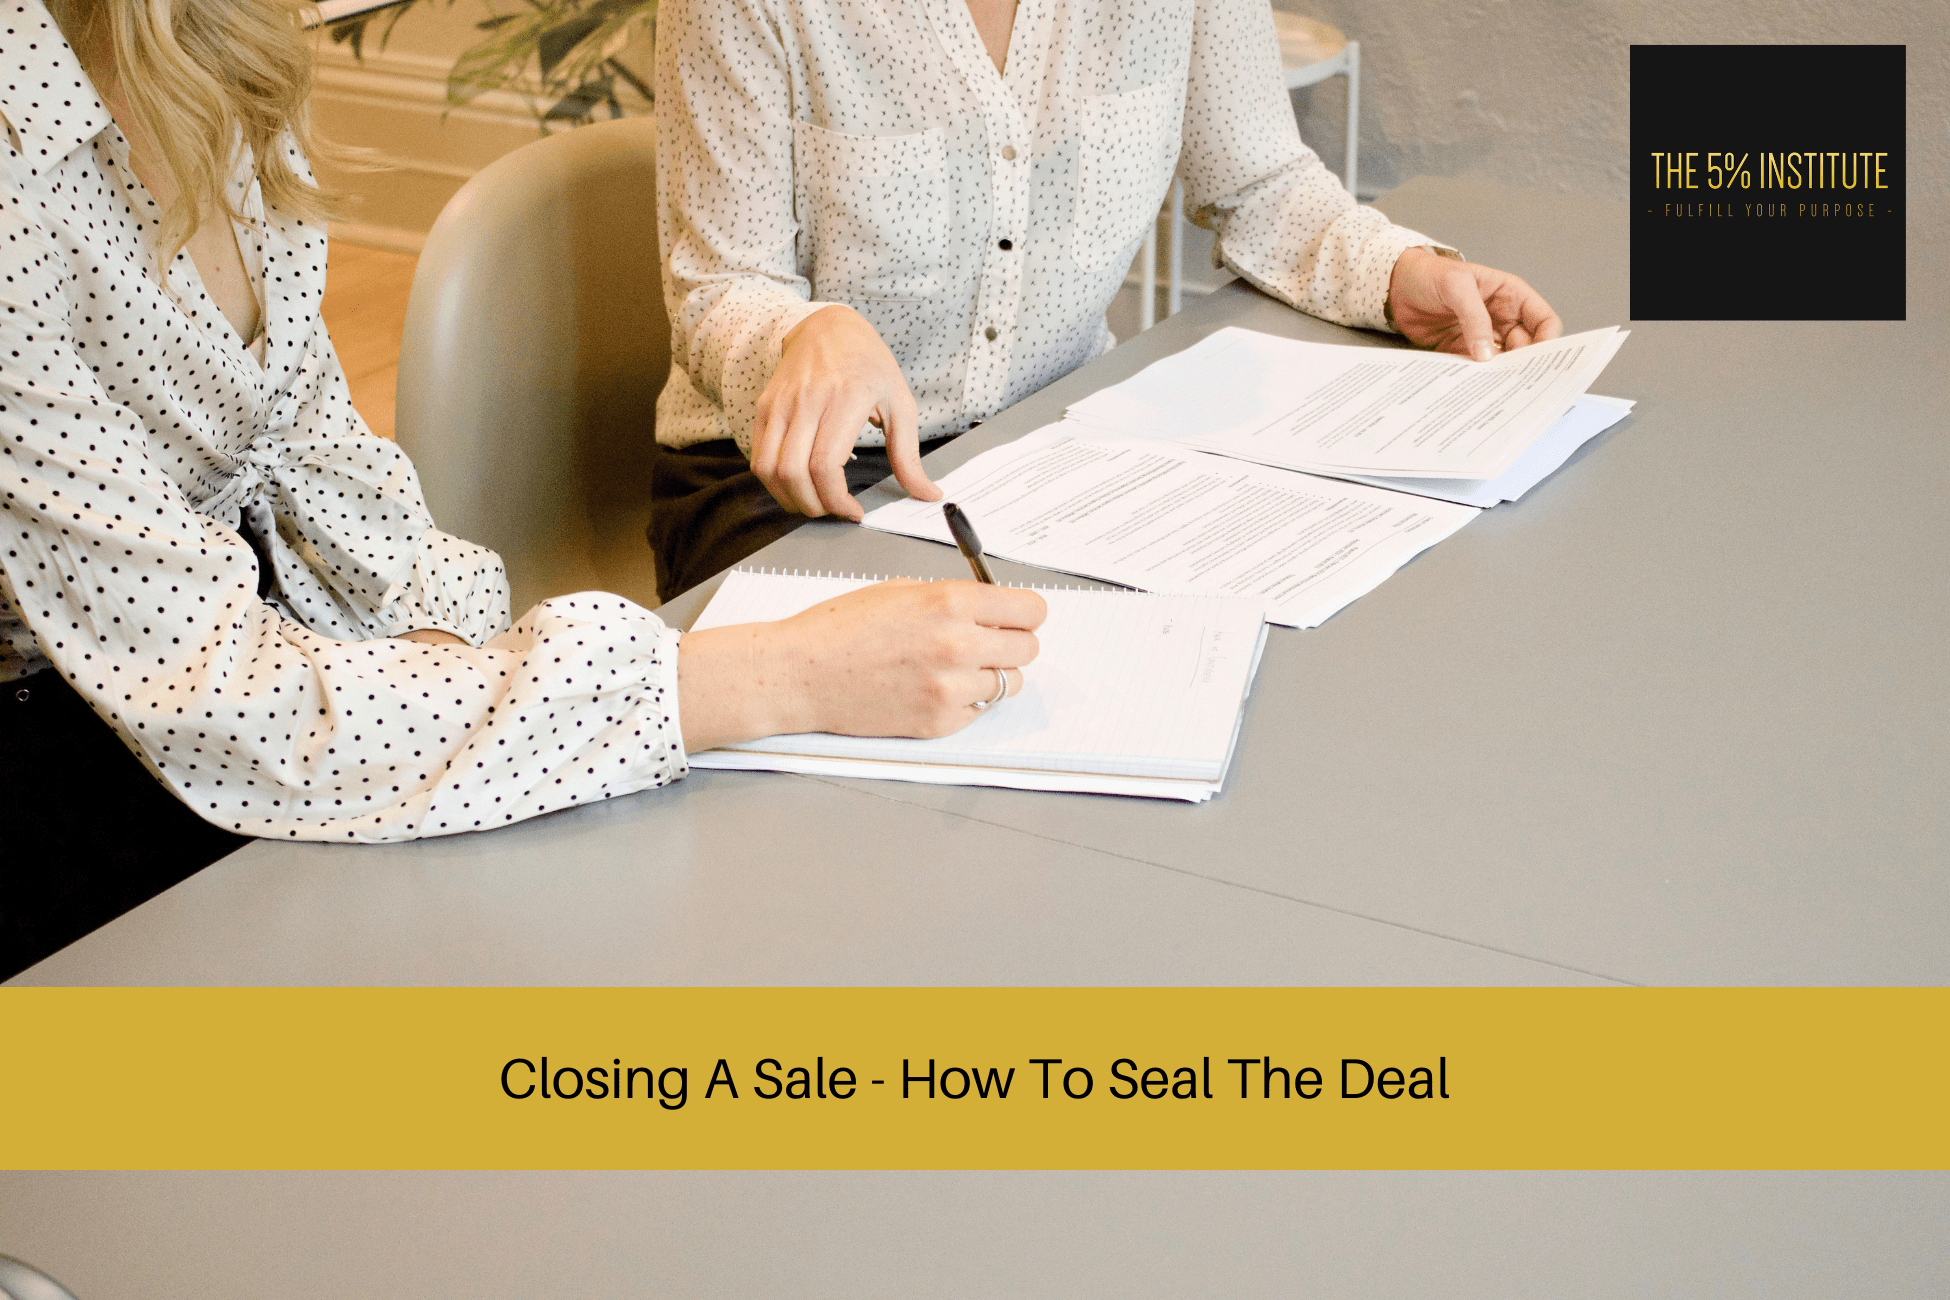 Closing A Sale - How To Seal The Deal